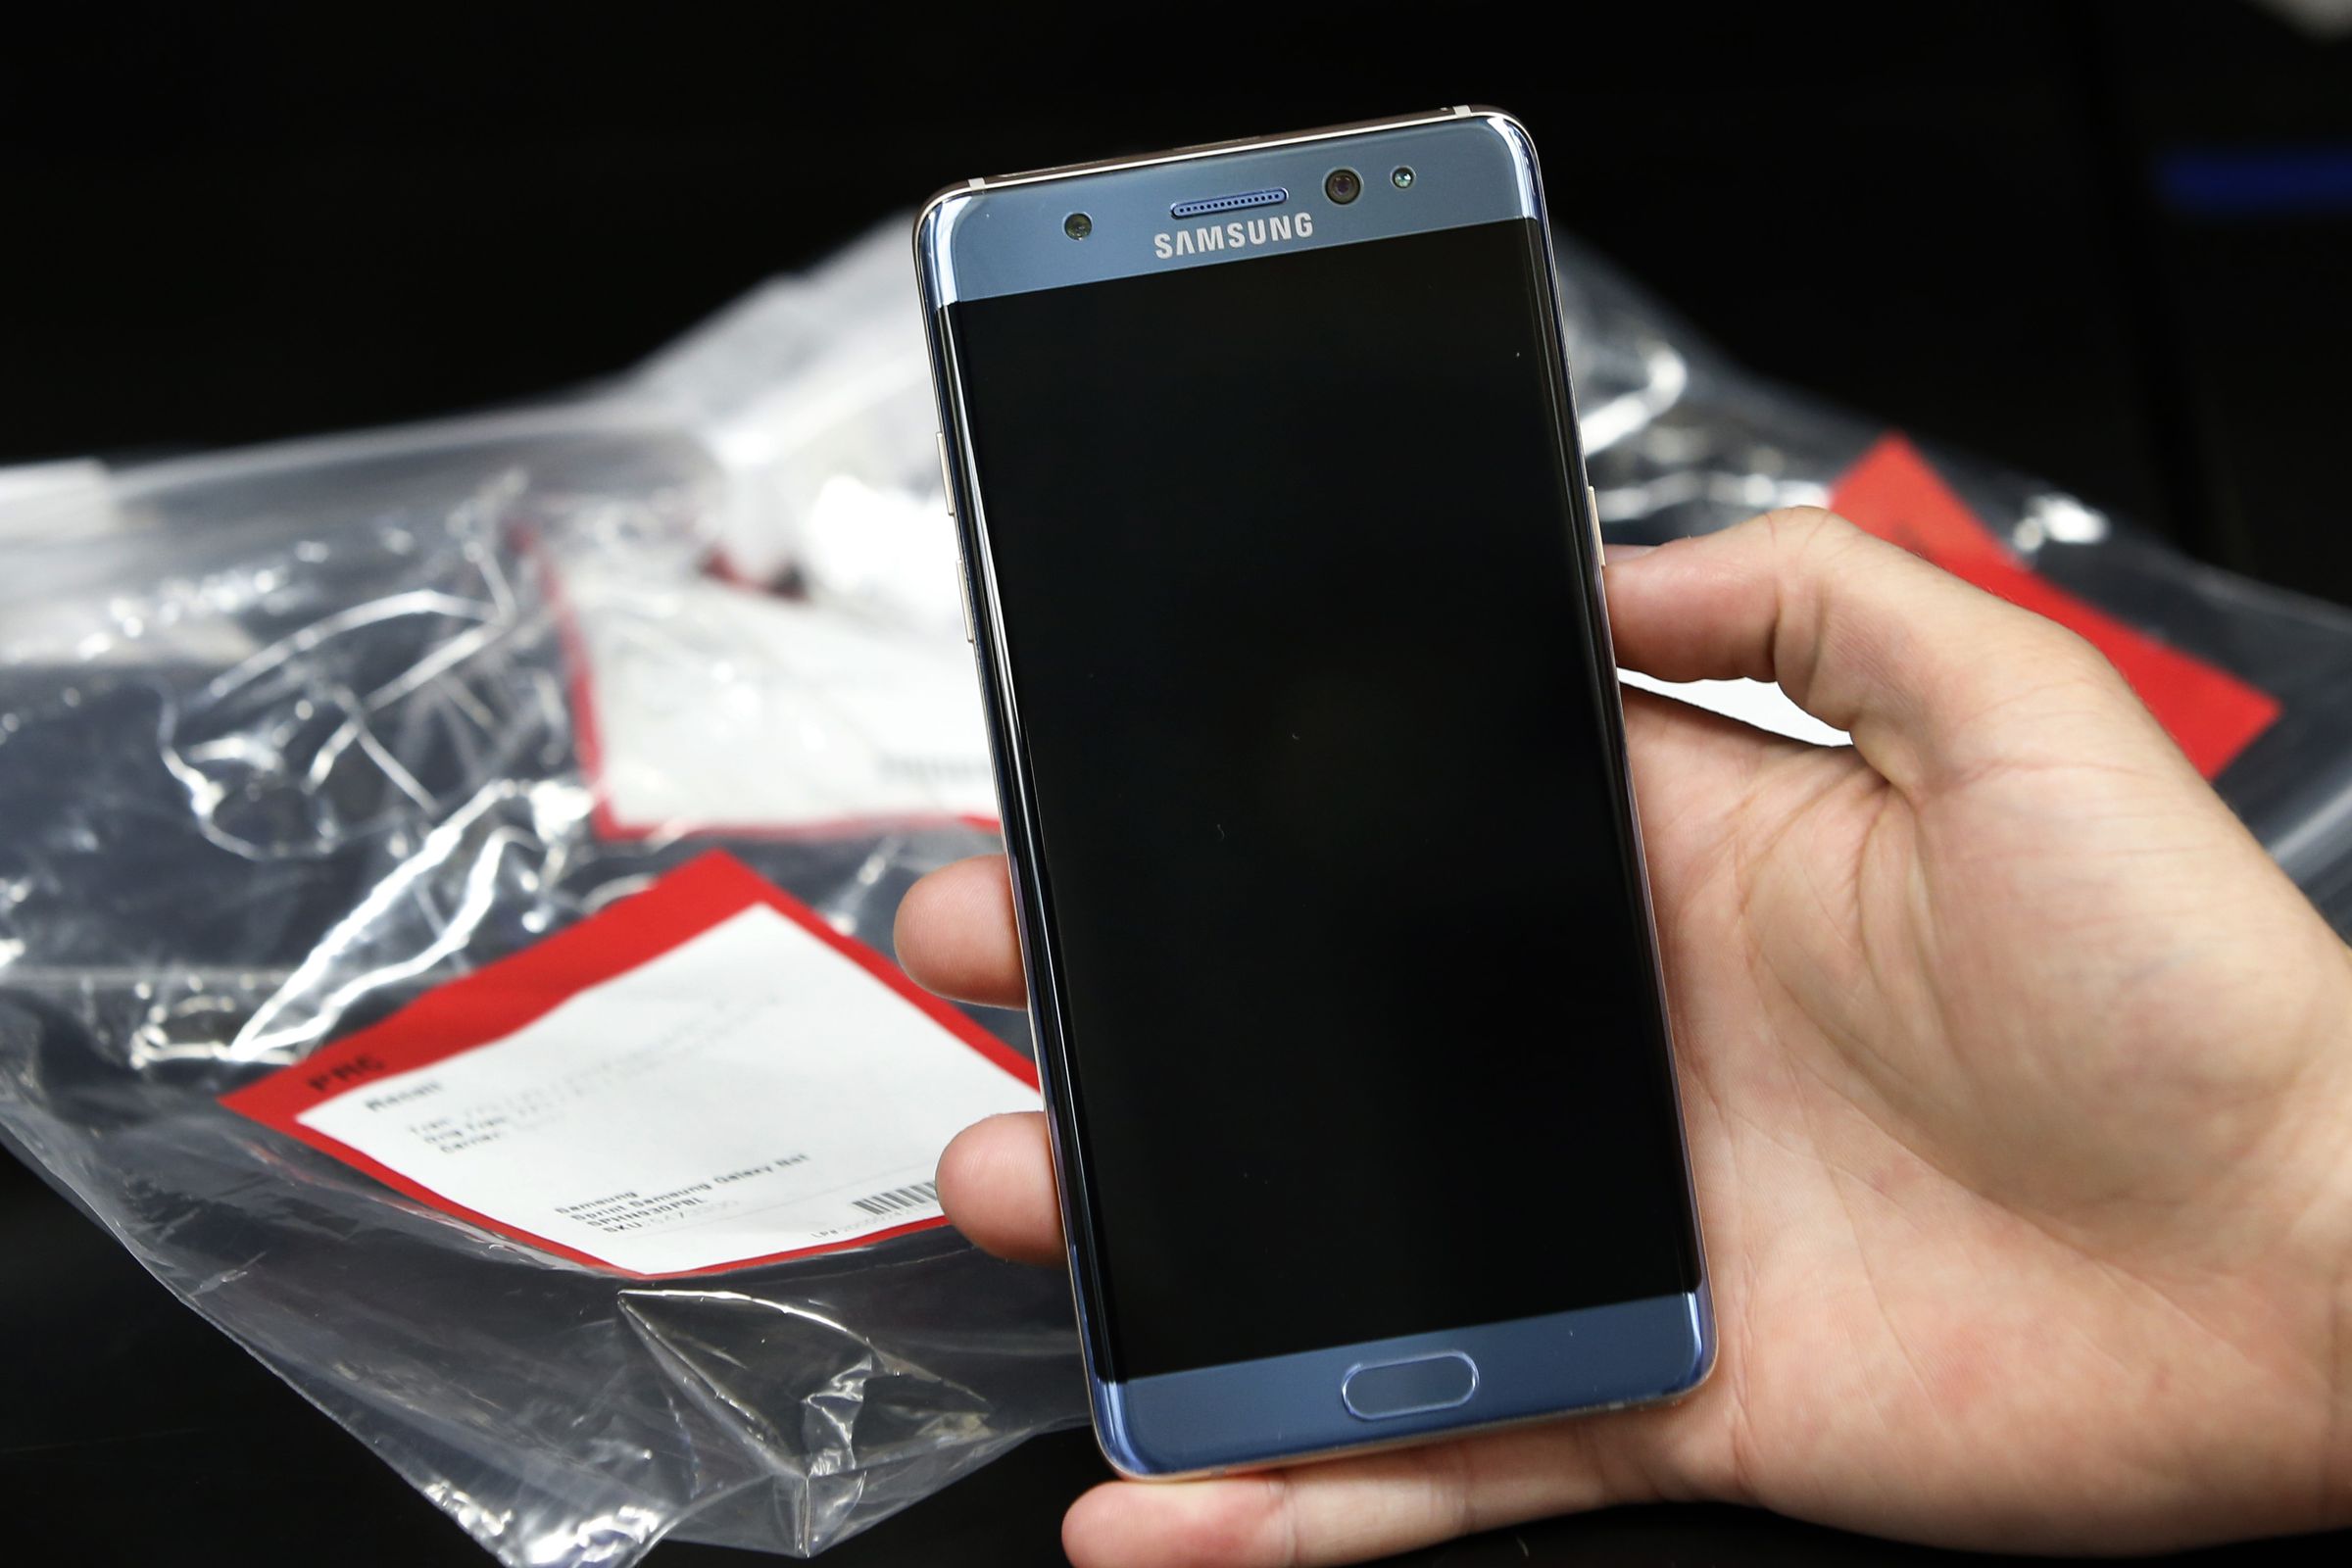 Consumer Product Safety Commission Announces Recall Of Samsung's New Galaxy Note 7